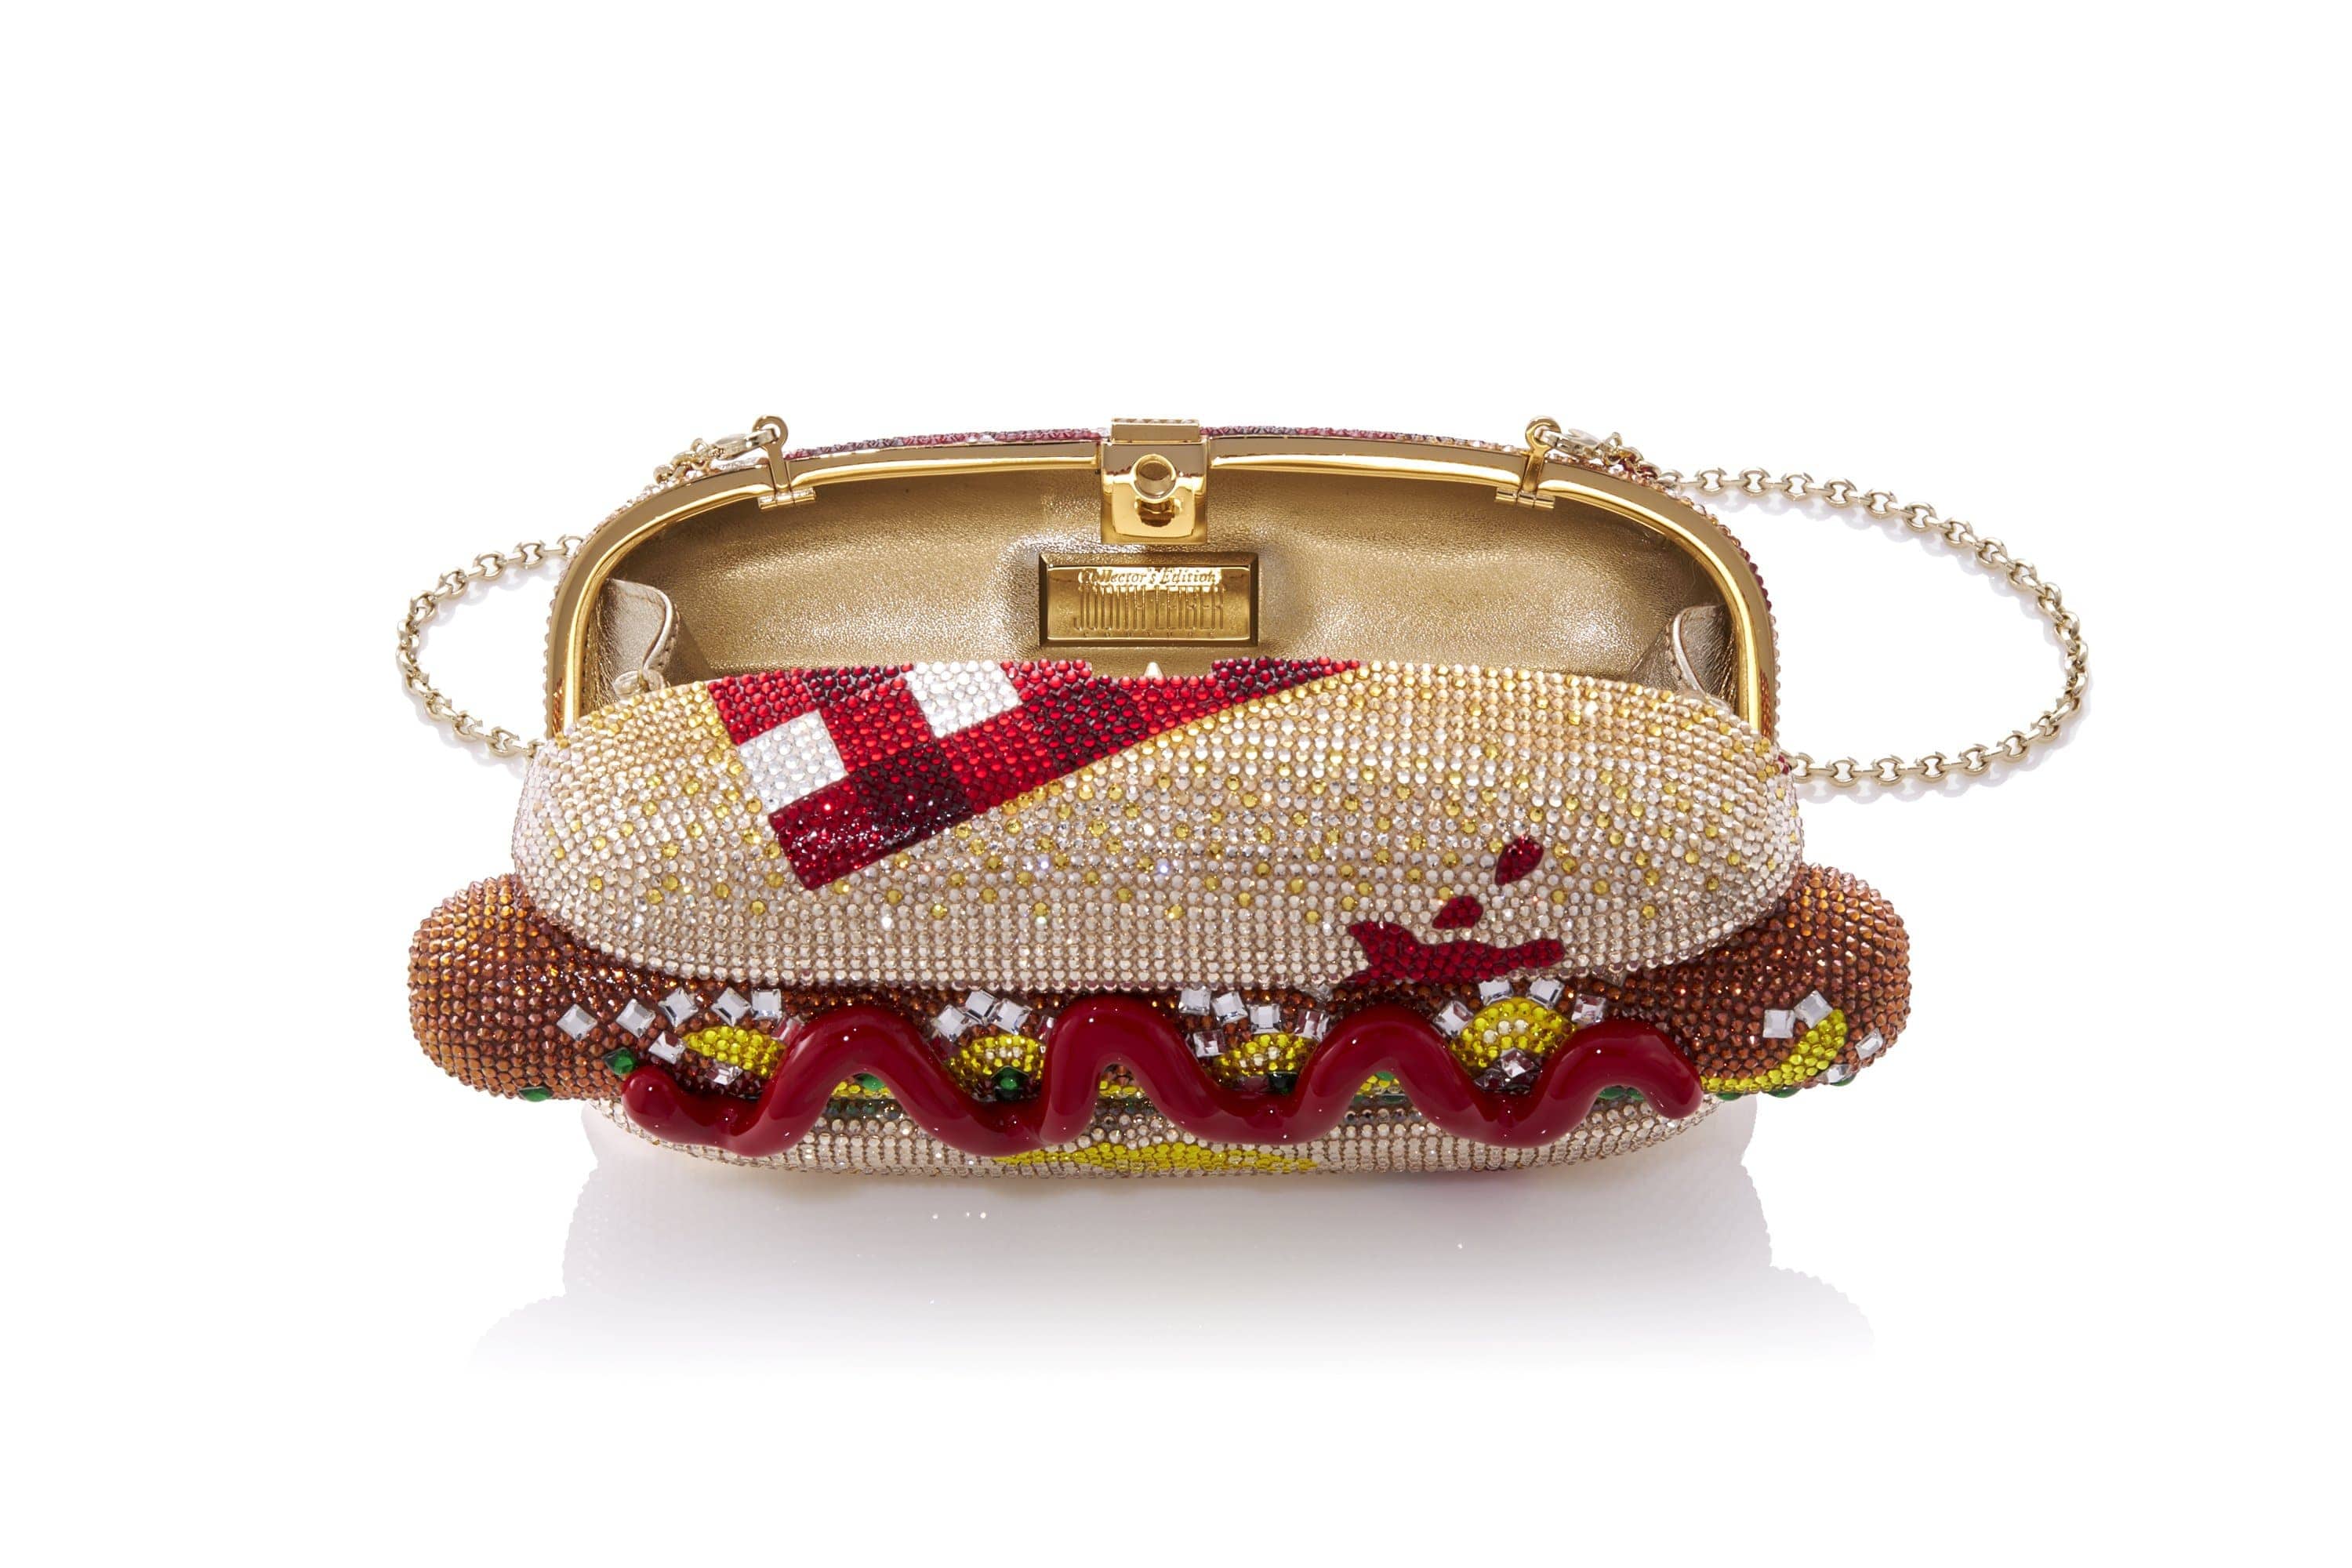 DECADES INC.: Judith Leiber Evening Bags for the Holidays